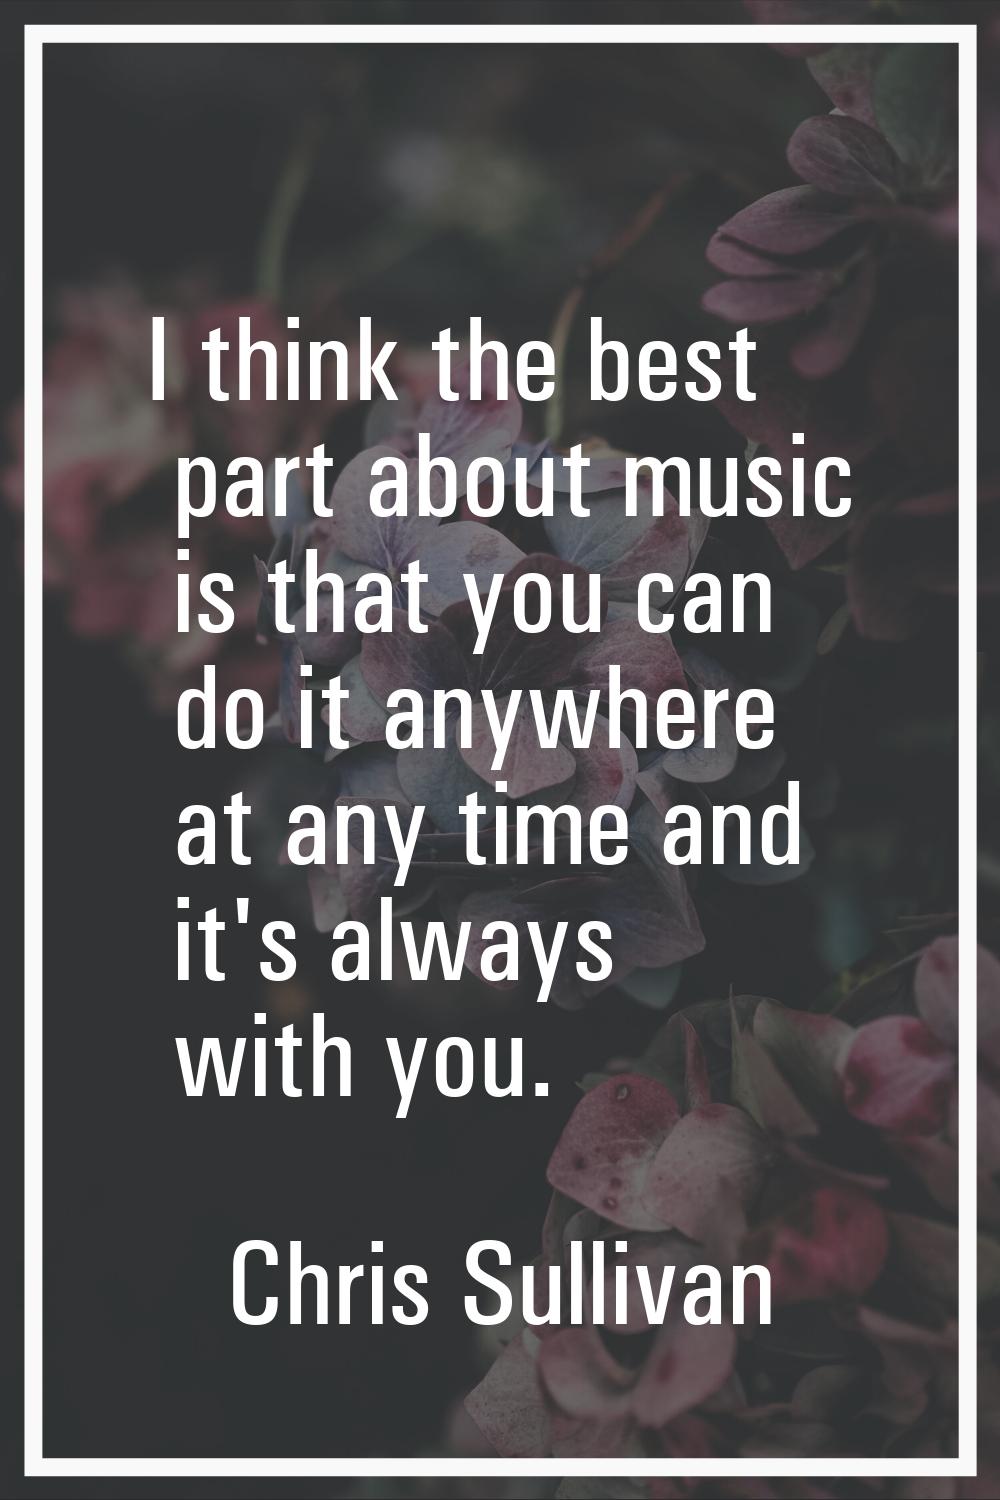 I think the best part about music is that you can do it anywhere at any time and it's always with y